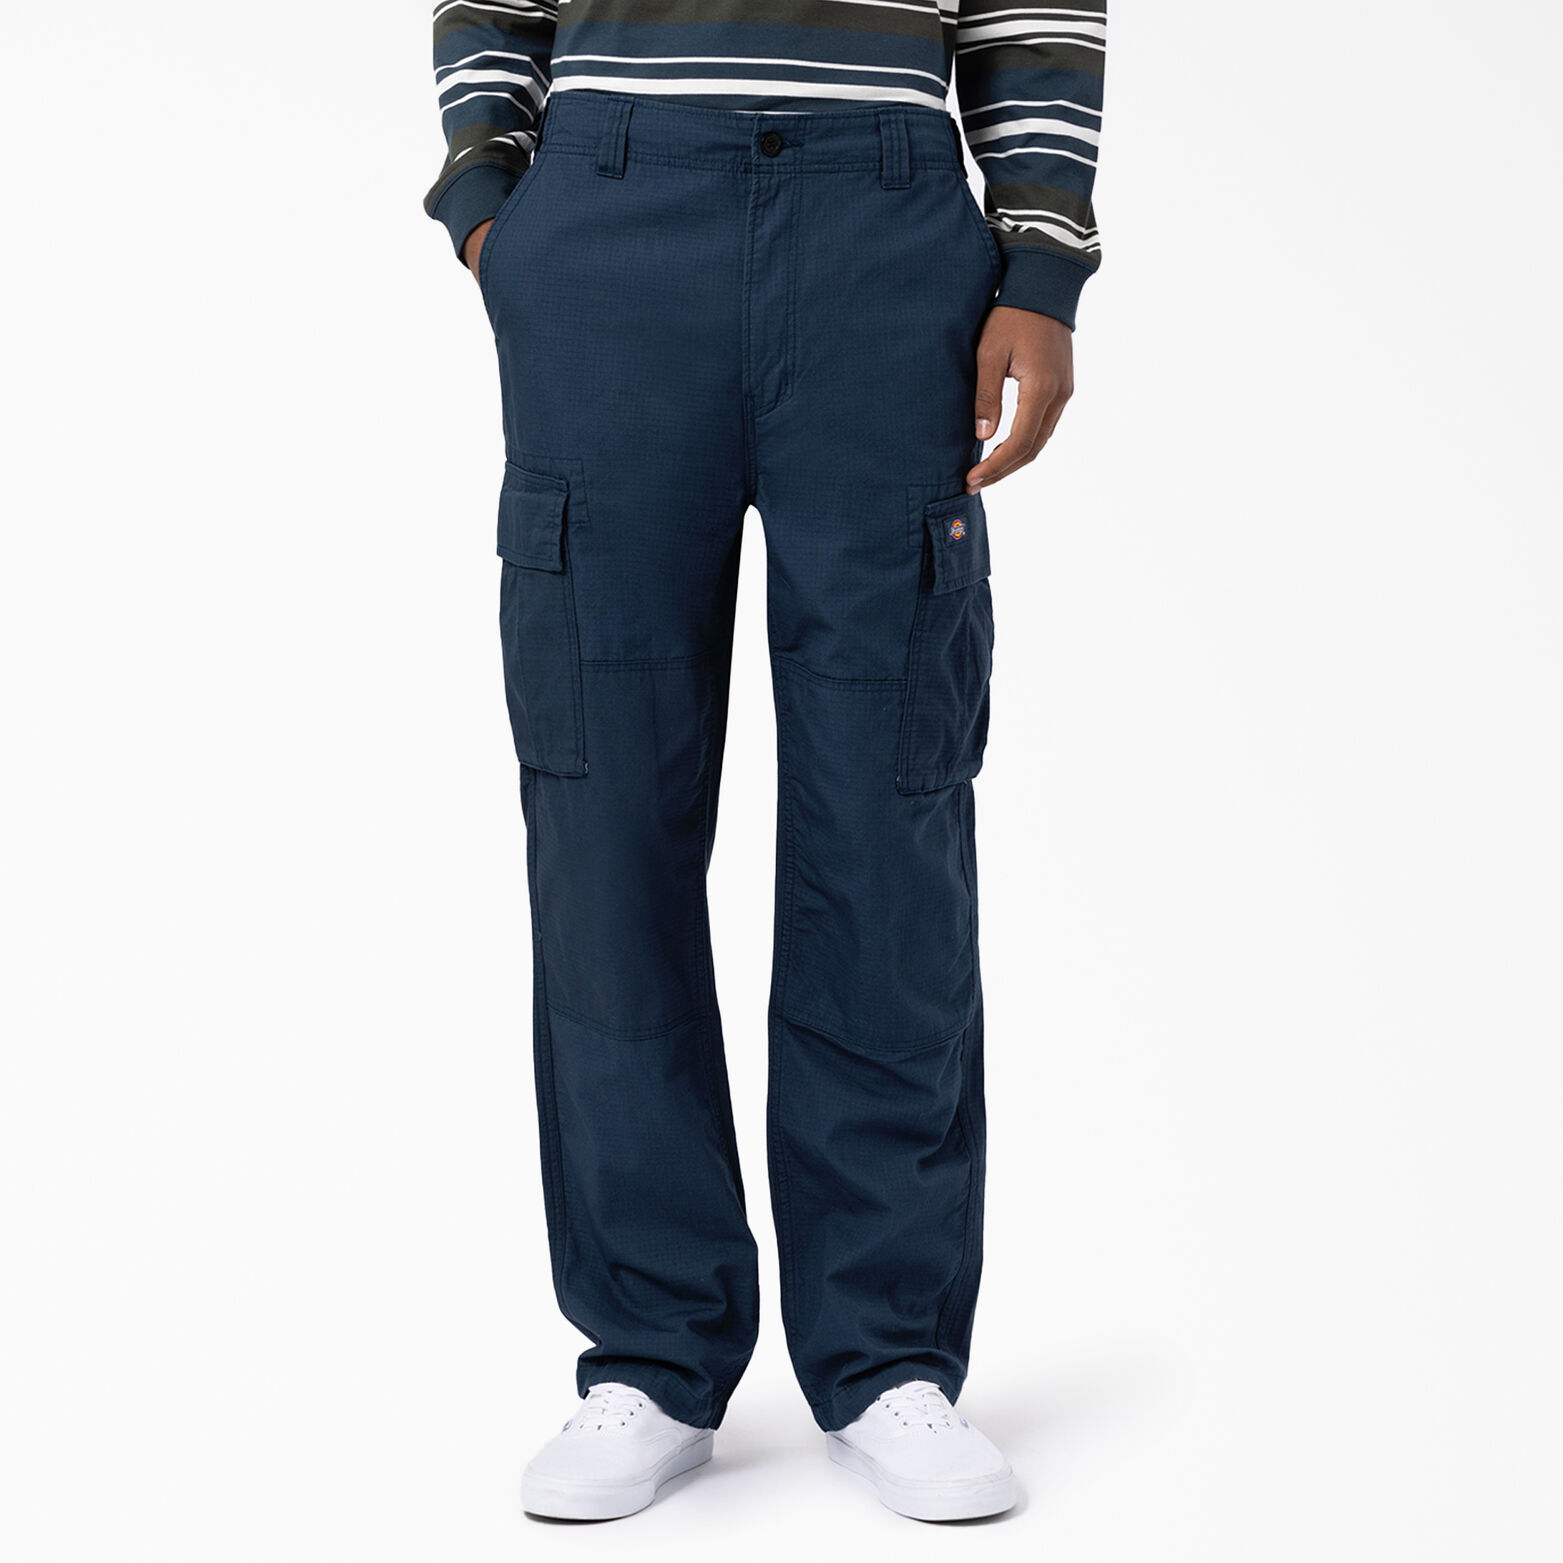 Eagle Relaxed Fit Double Knee Pants - Dickies US